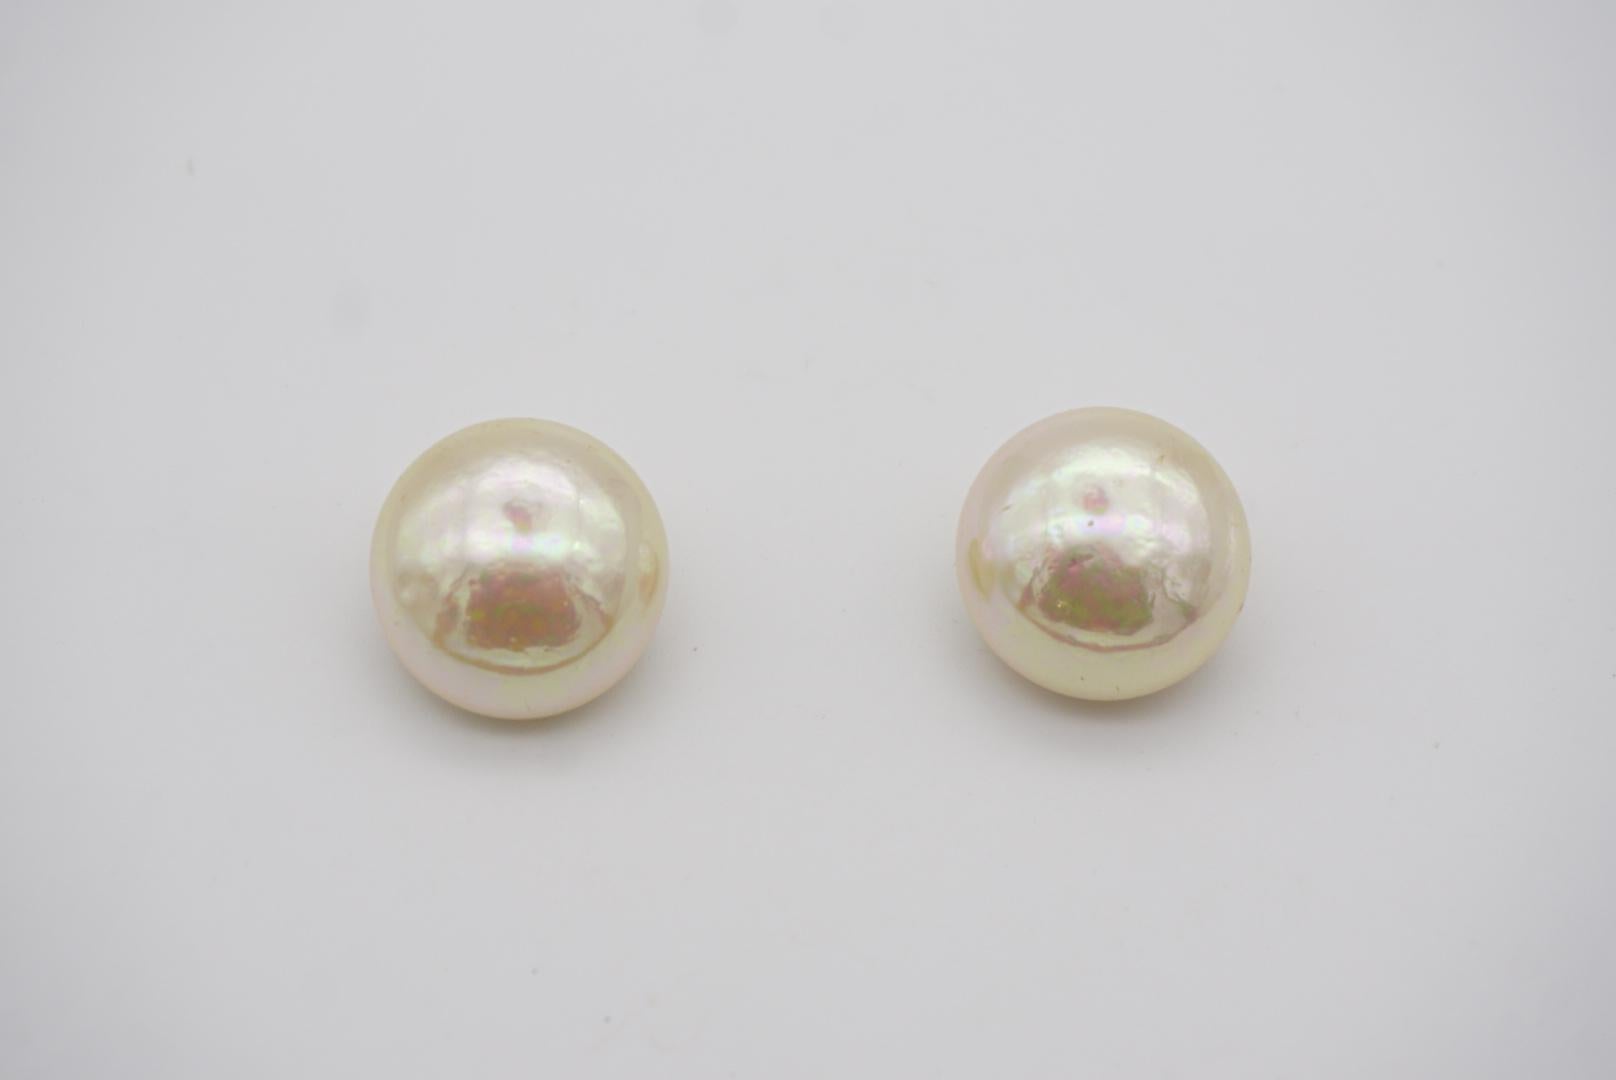 Christian Dior GROSSE 1964 Vintage Large Round White Pearl Gold Clip Earrings In Excellent Condition For Sale In Wokingham, England